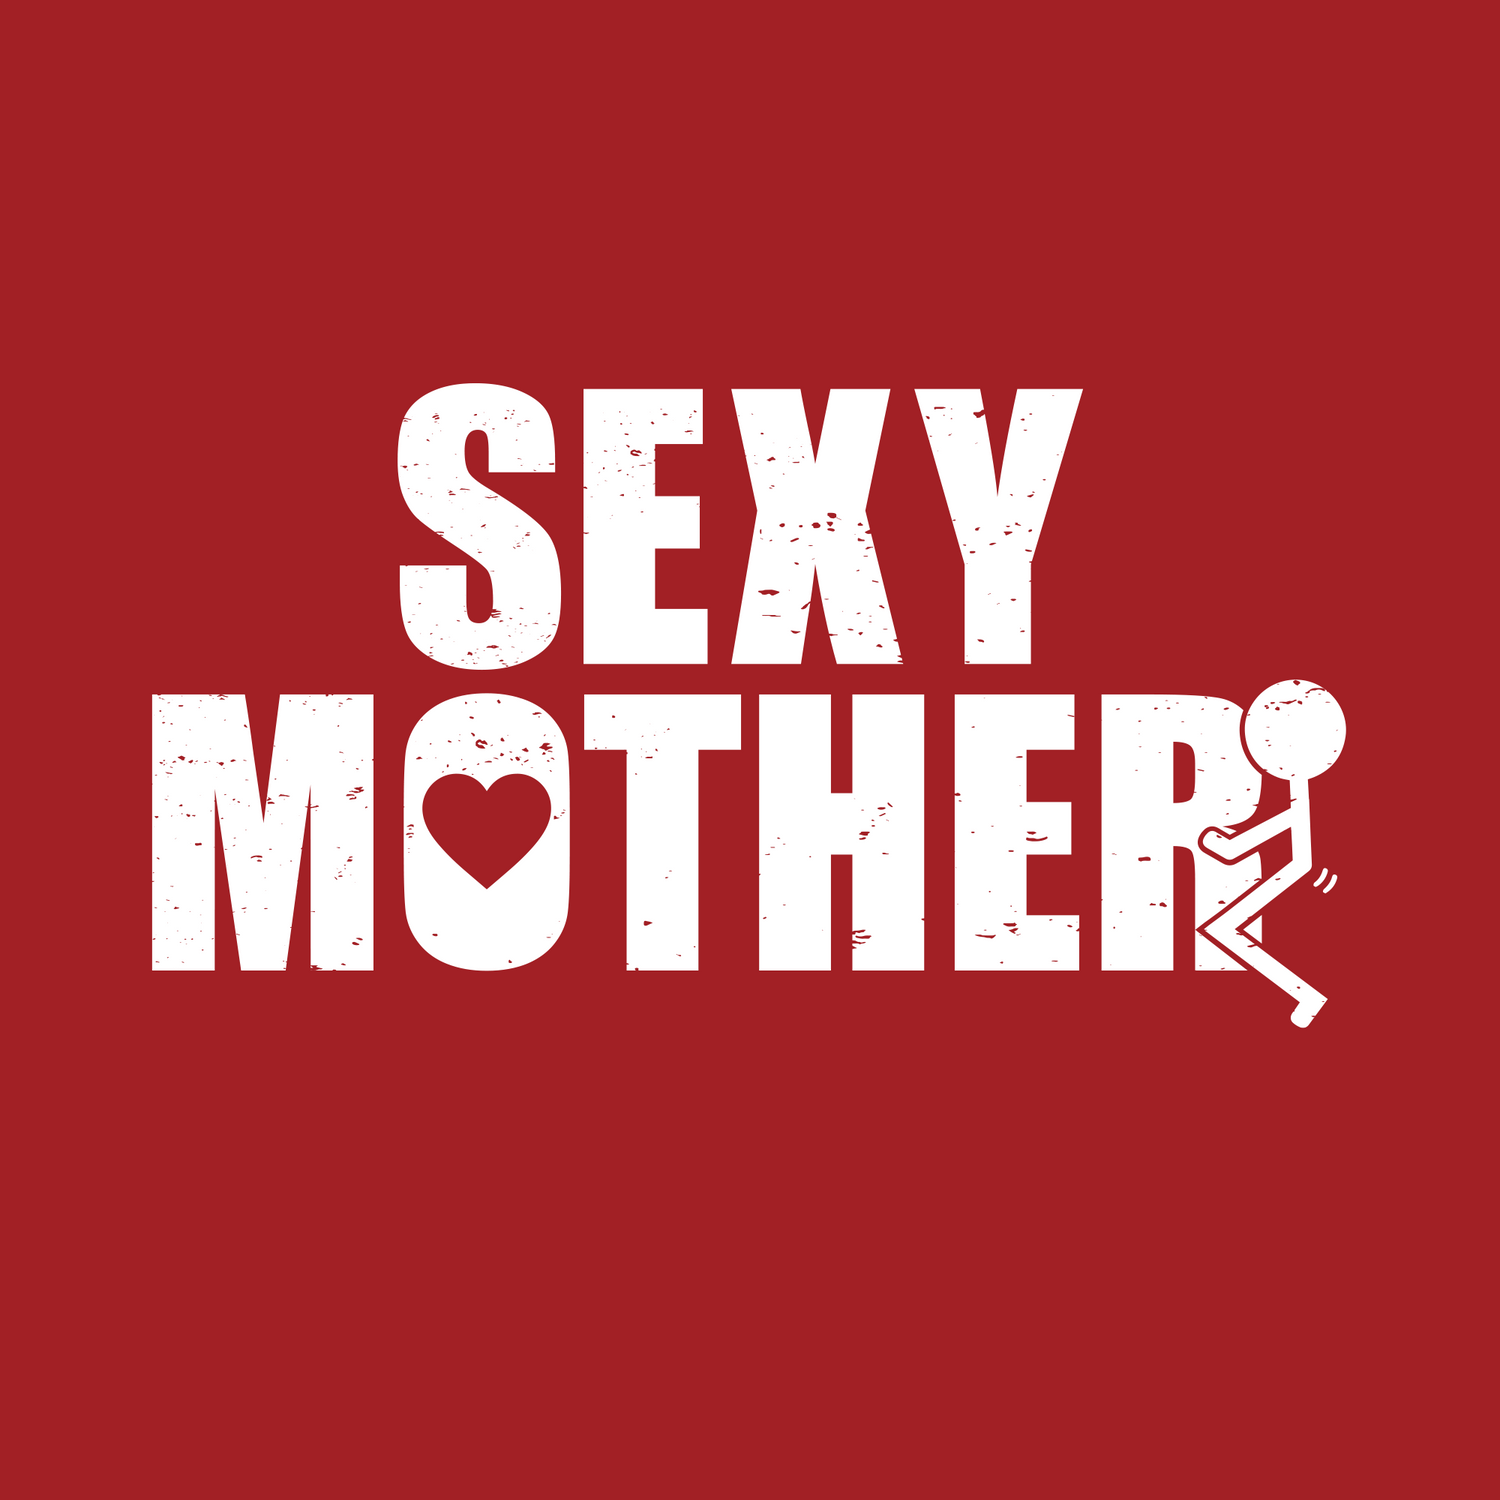 Sexy Mother F*cker 